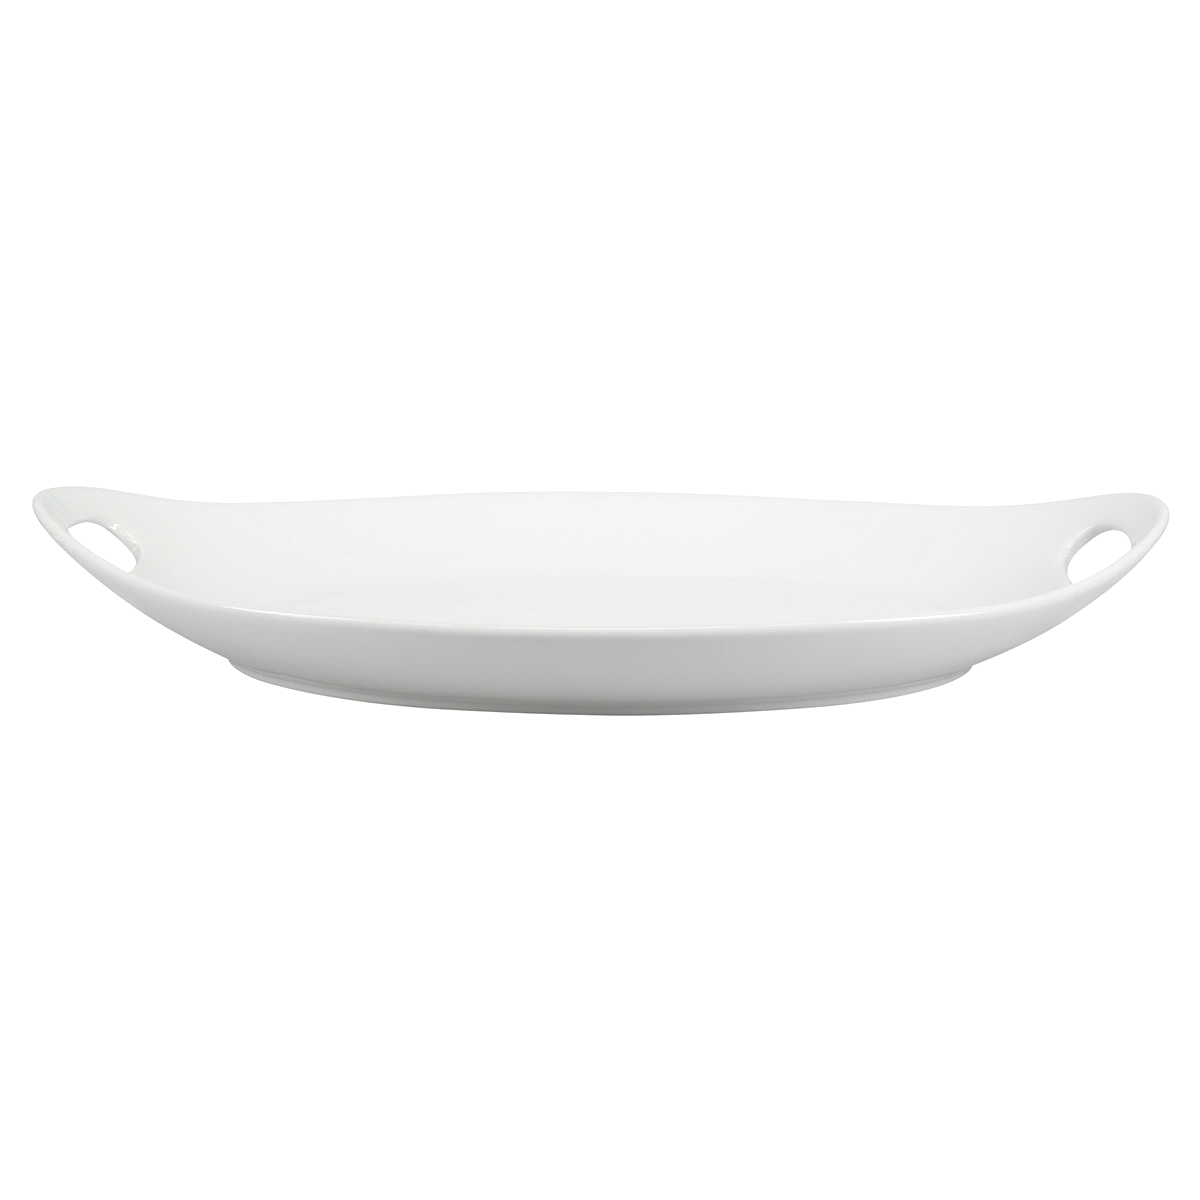 slide 1 of 1, BIA Cordon Bleu Oval Platter with Handles, White, 17.25 in